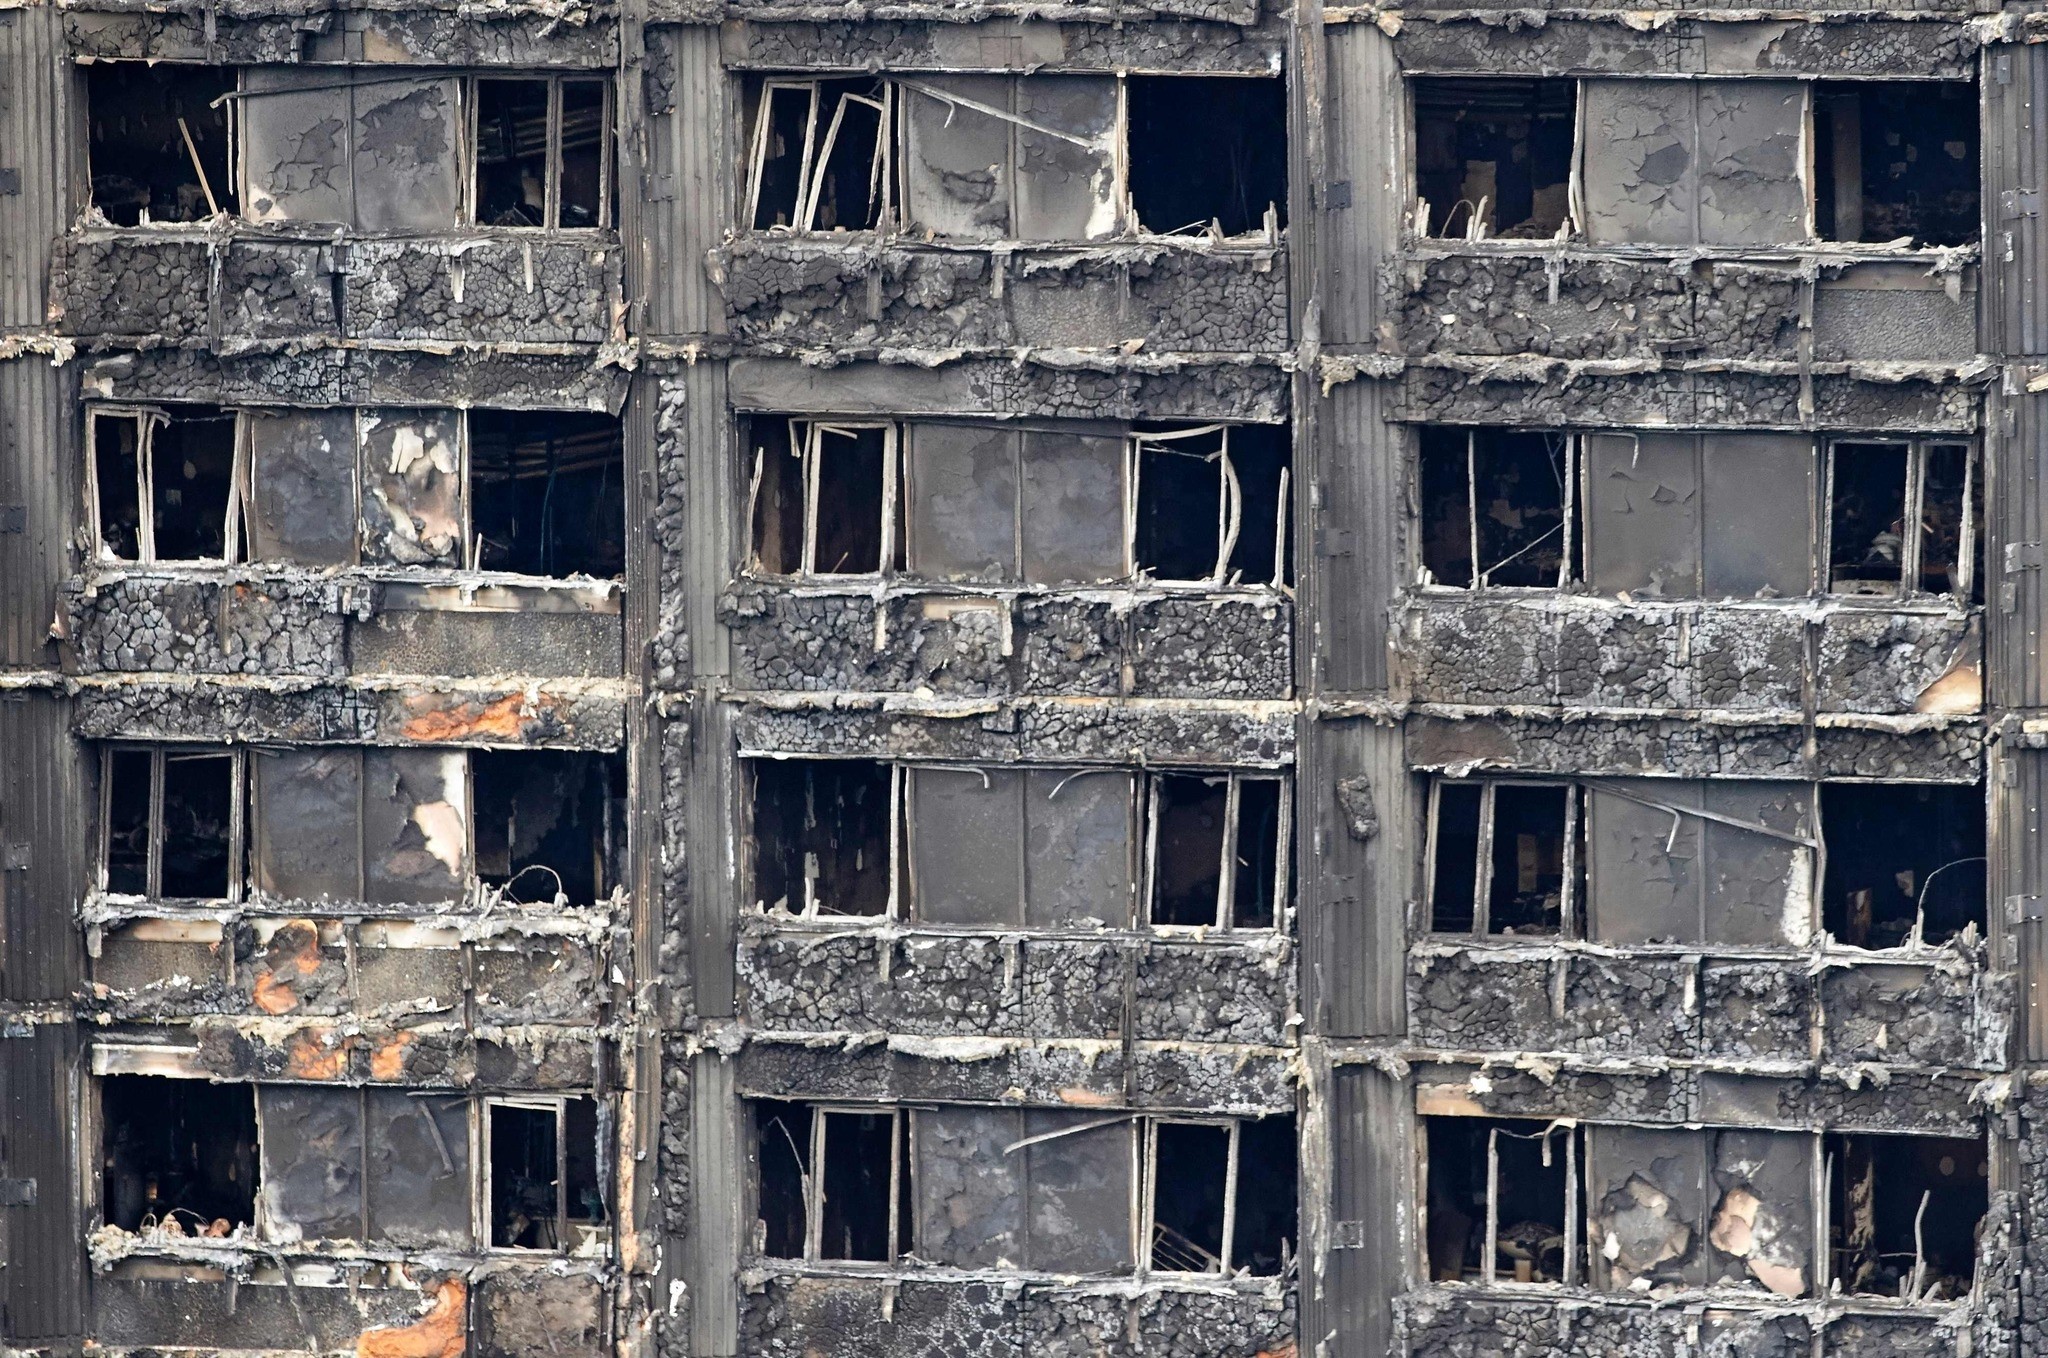 The charred remains of clading are pictured on the outer walls of the burnt out shell of the Grenfell Tower block in north Kensington, west London on June 22, 2017. (AFP Photo)